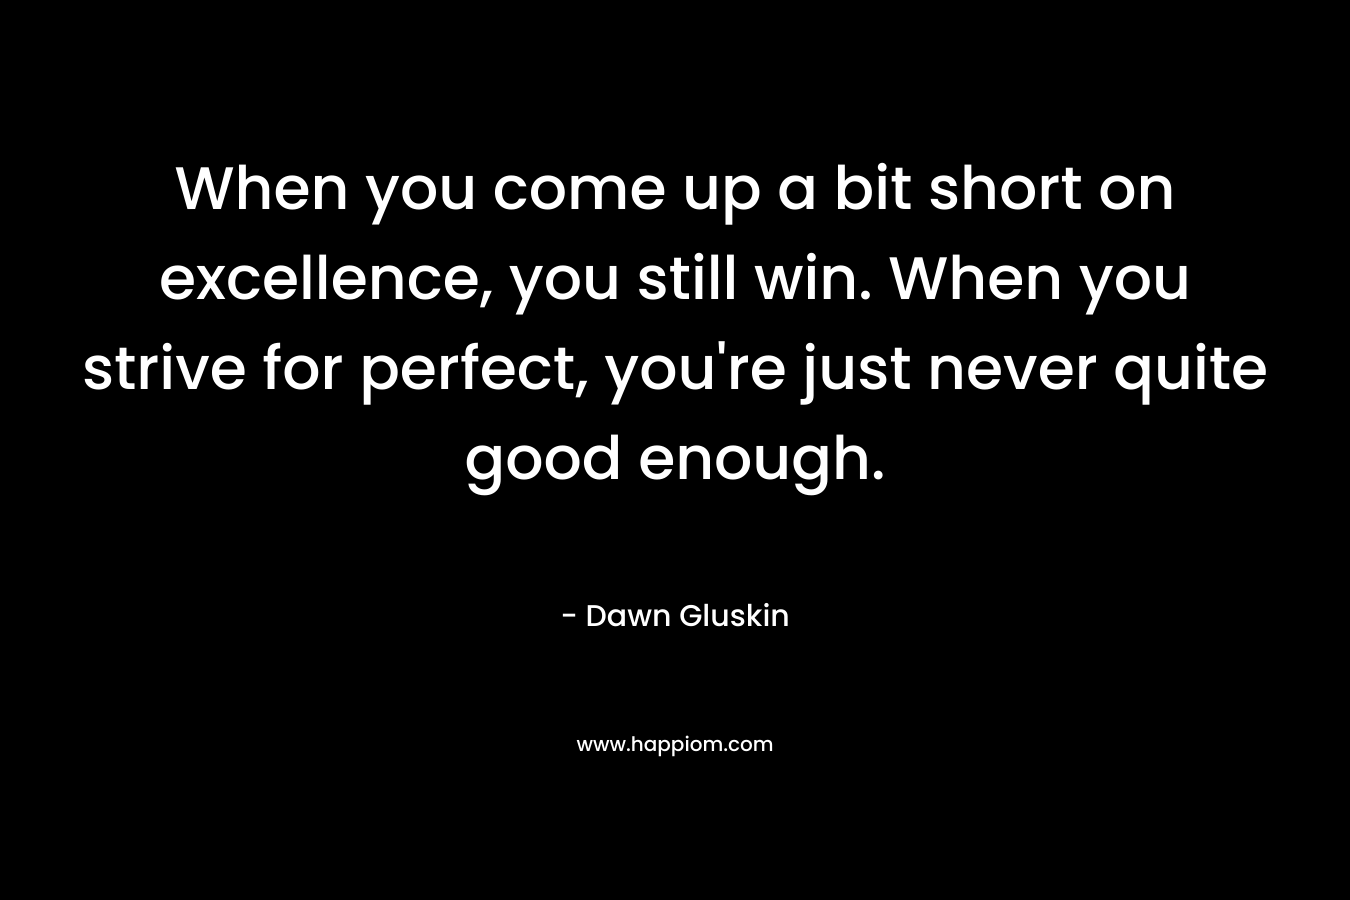 When you come up a bit short on excellence, you still win. When you strive for perfect, you’re just never quite good enough. – Dawn Gluskin